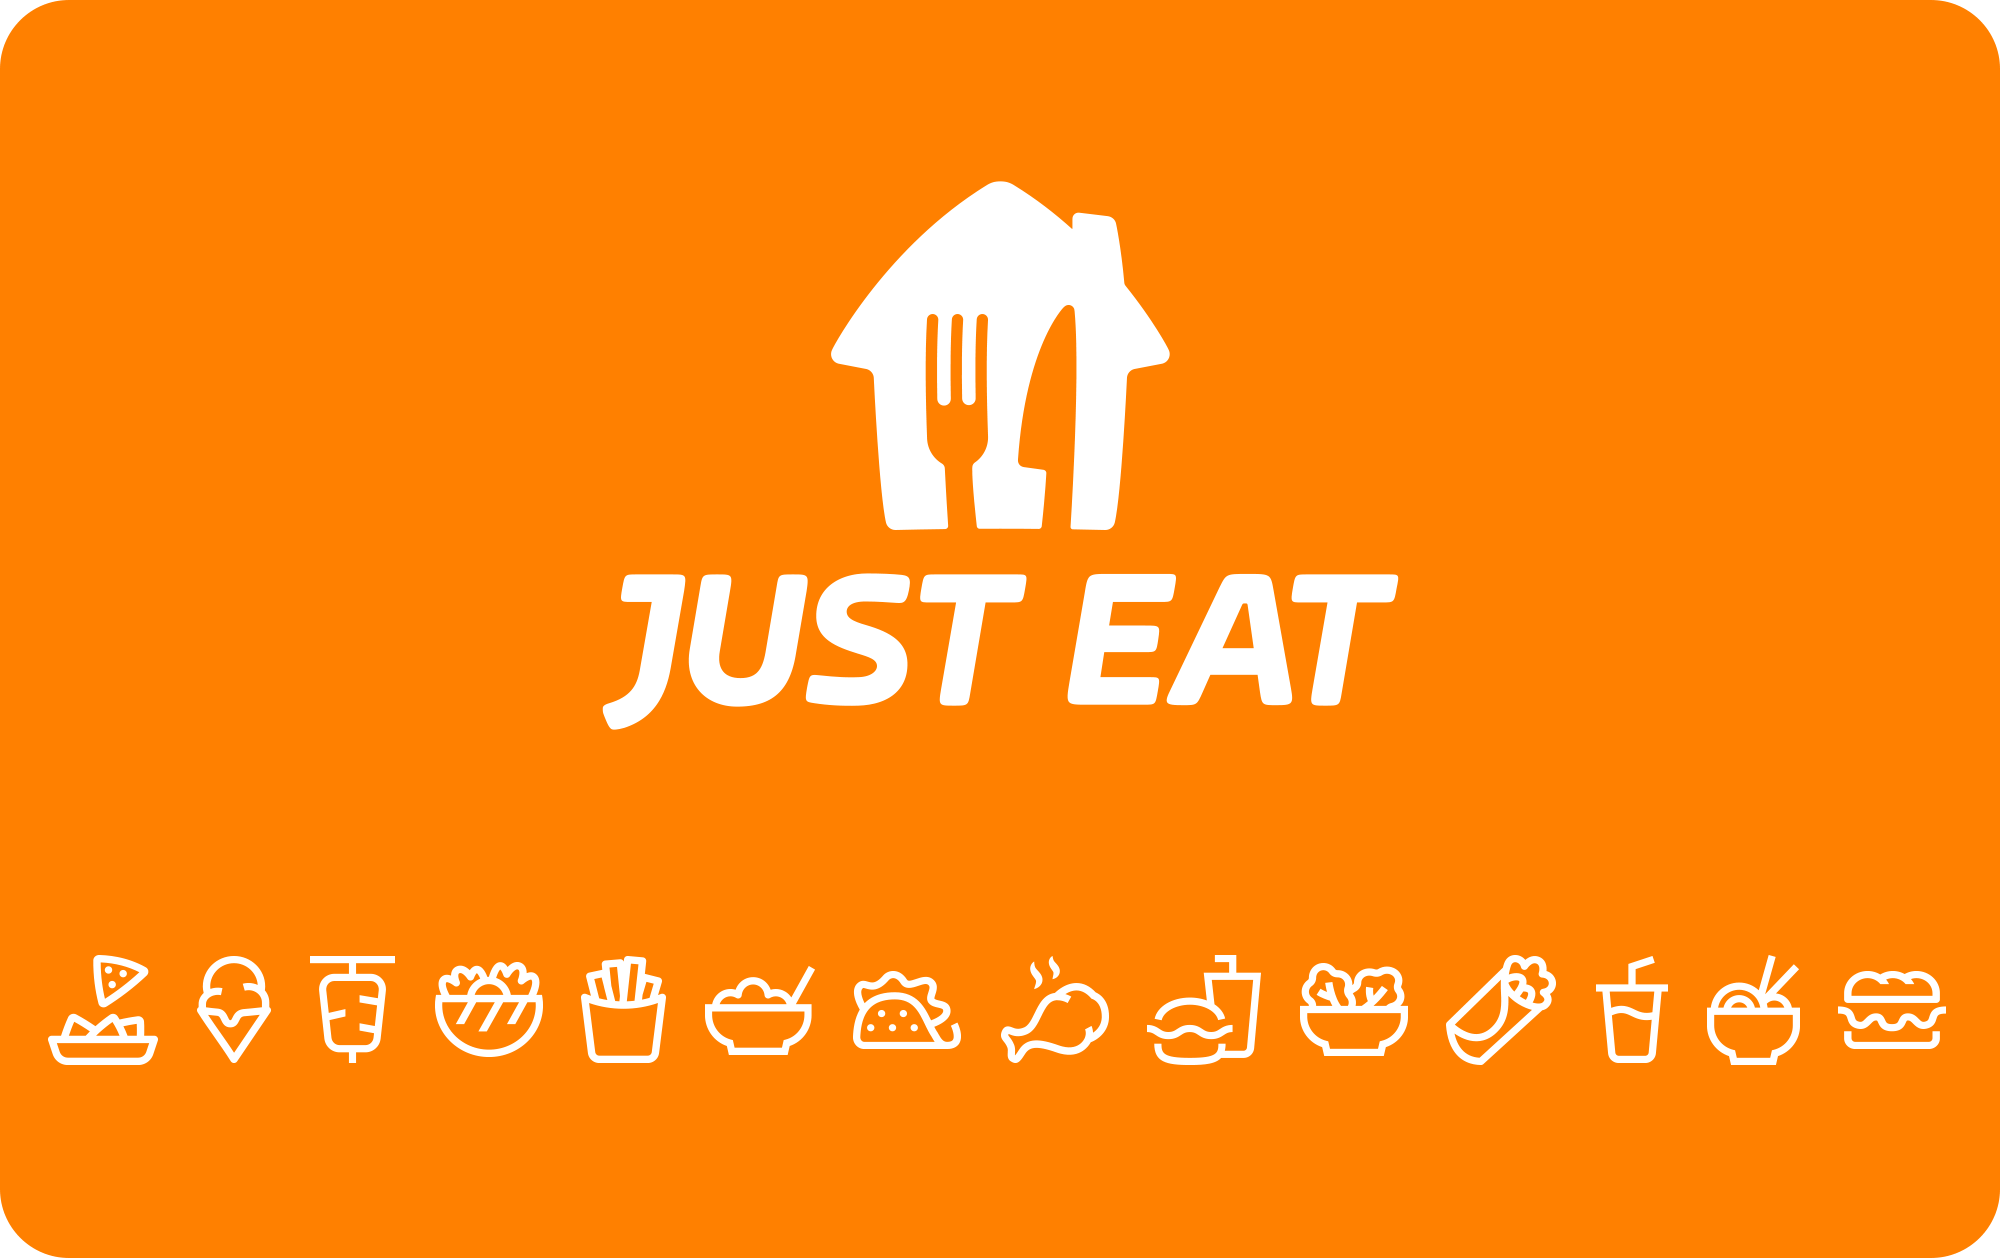 Just Eat €40 Gift Card FR